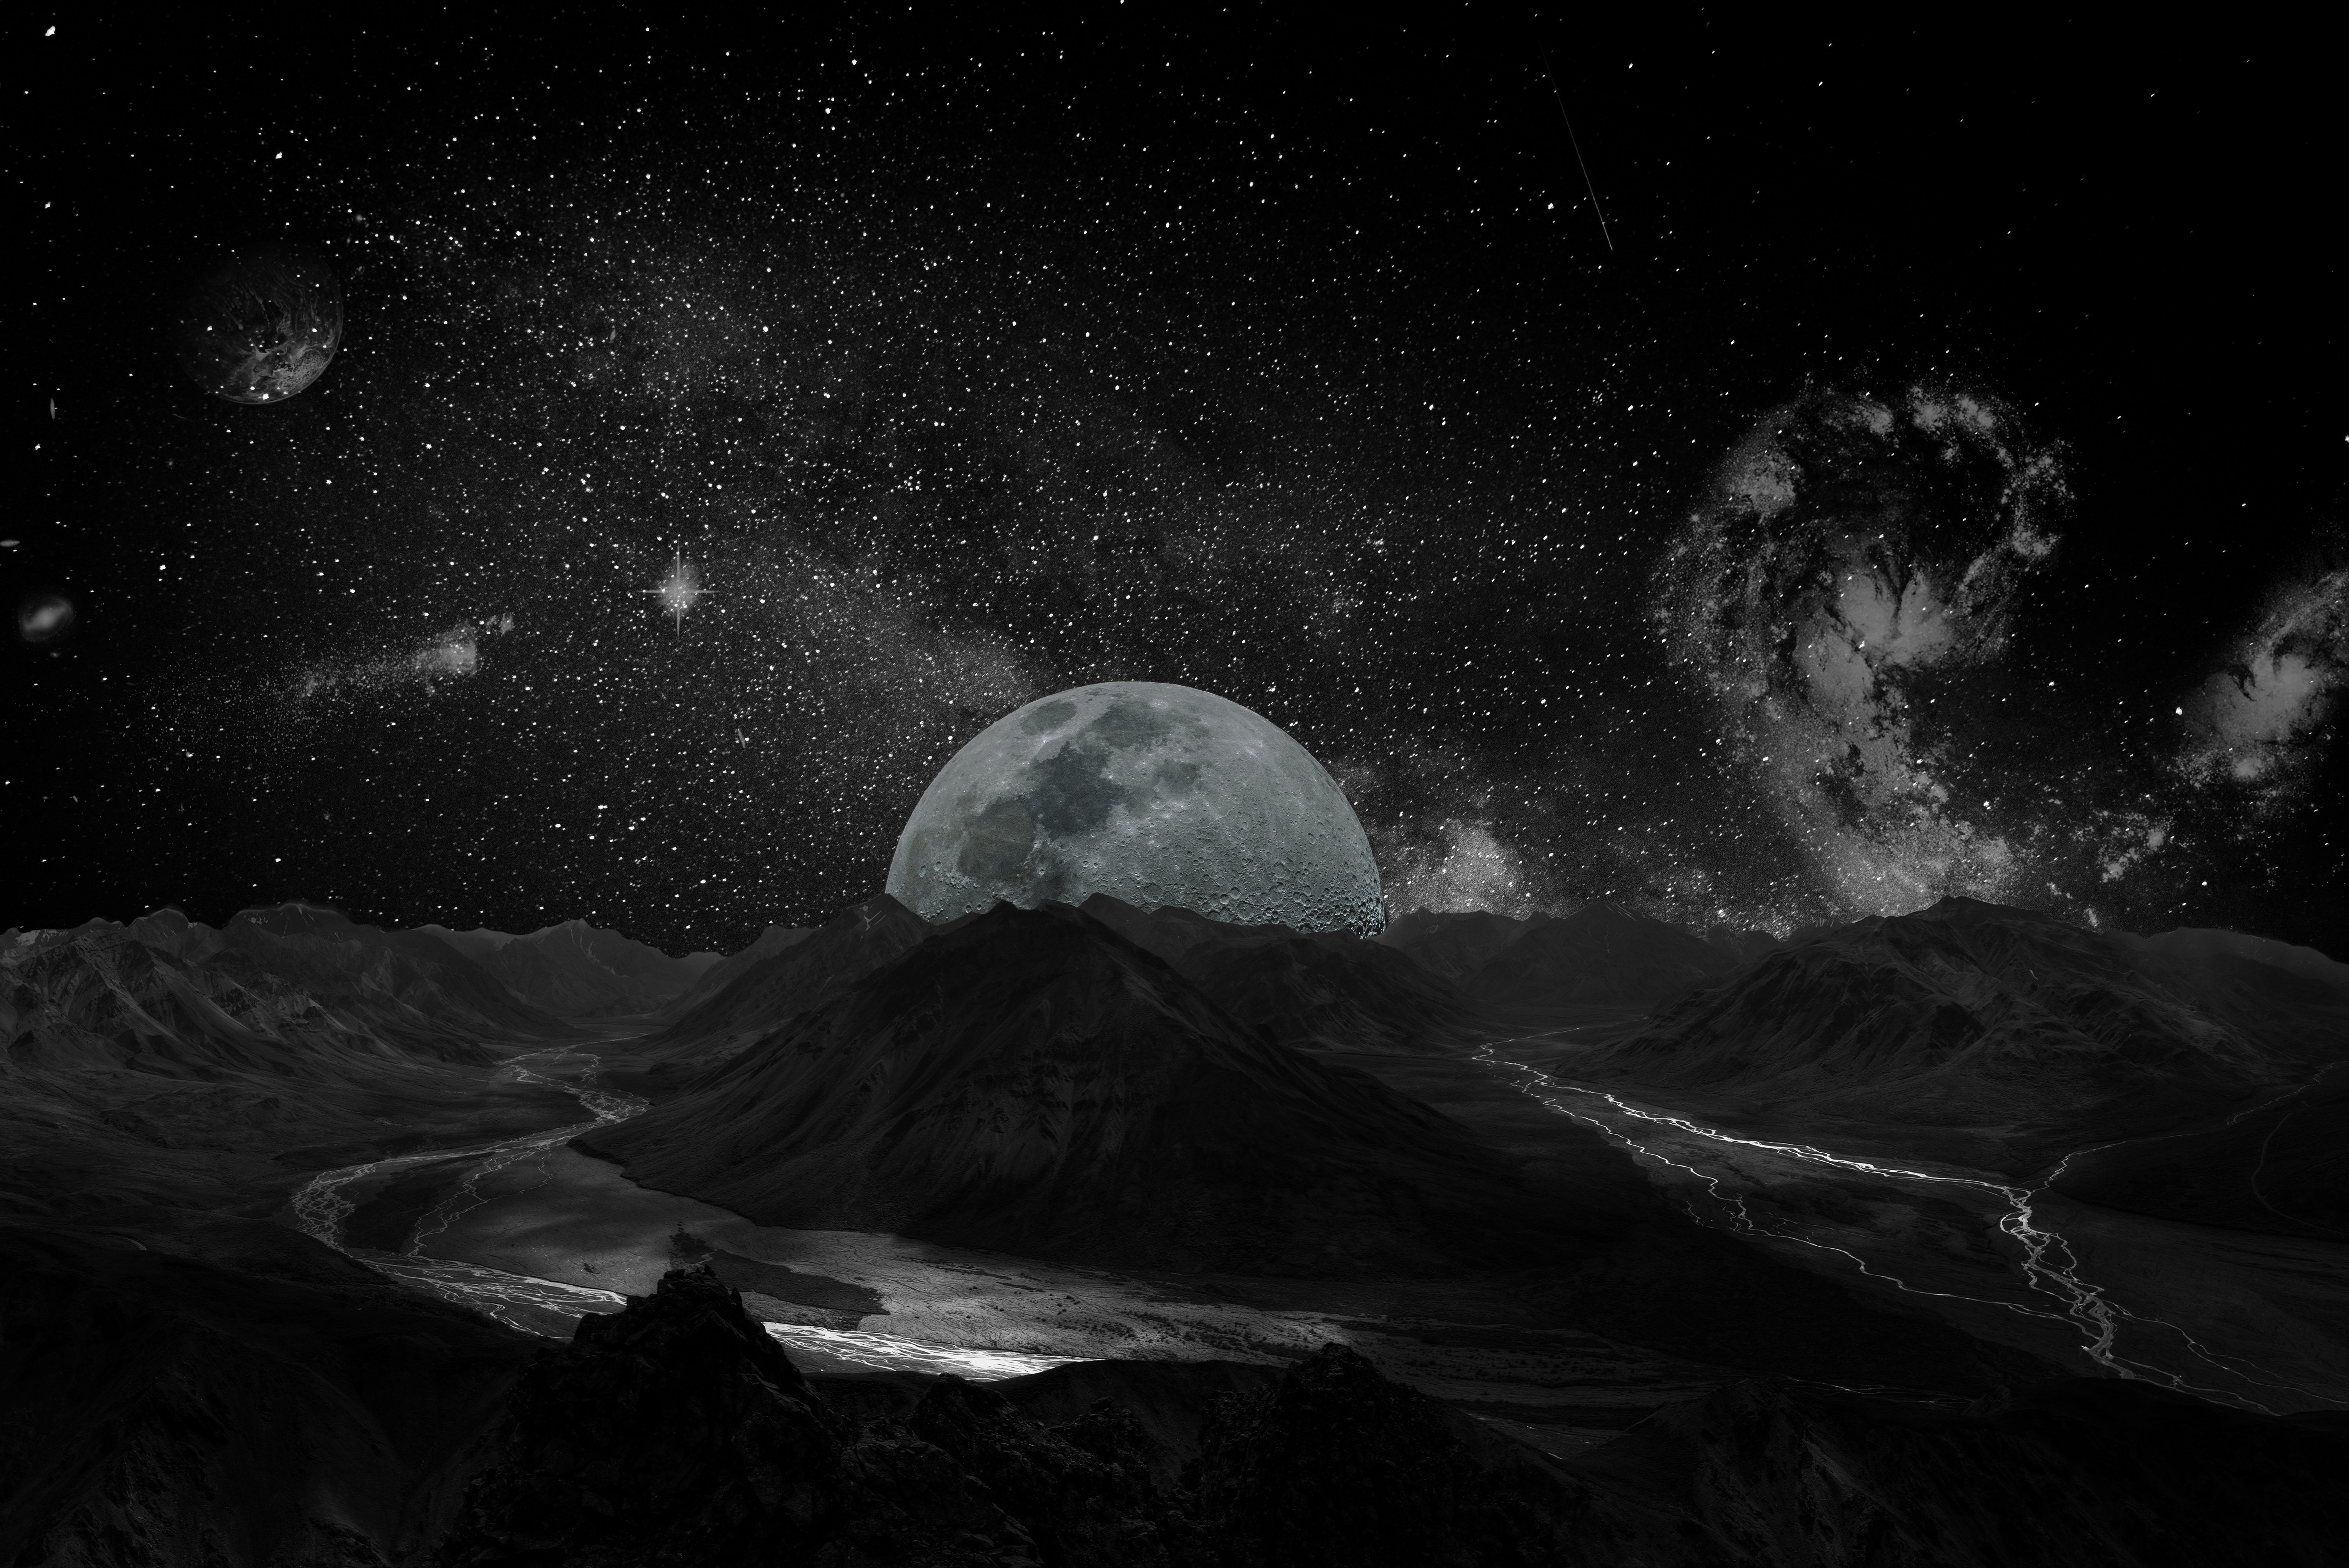 photoshop, bw, moon, universe, chb wallpaper for mobile